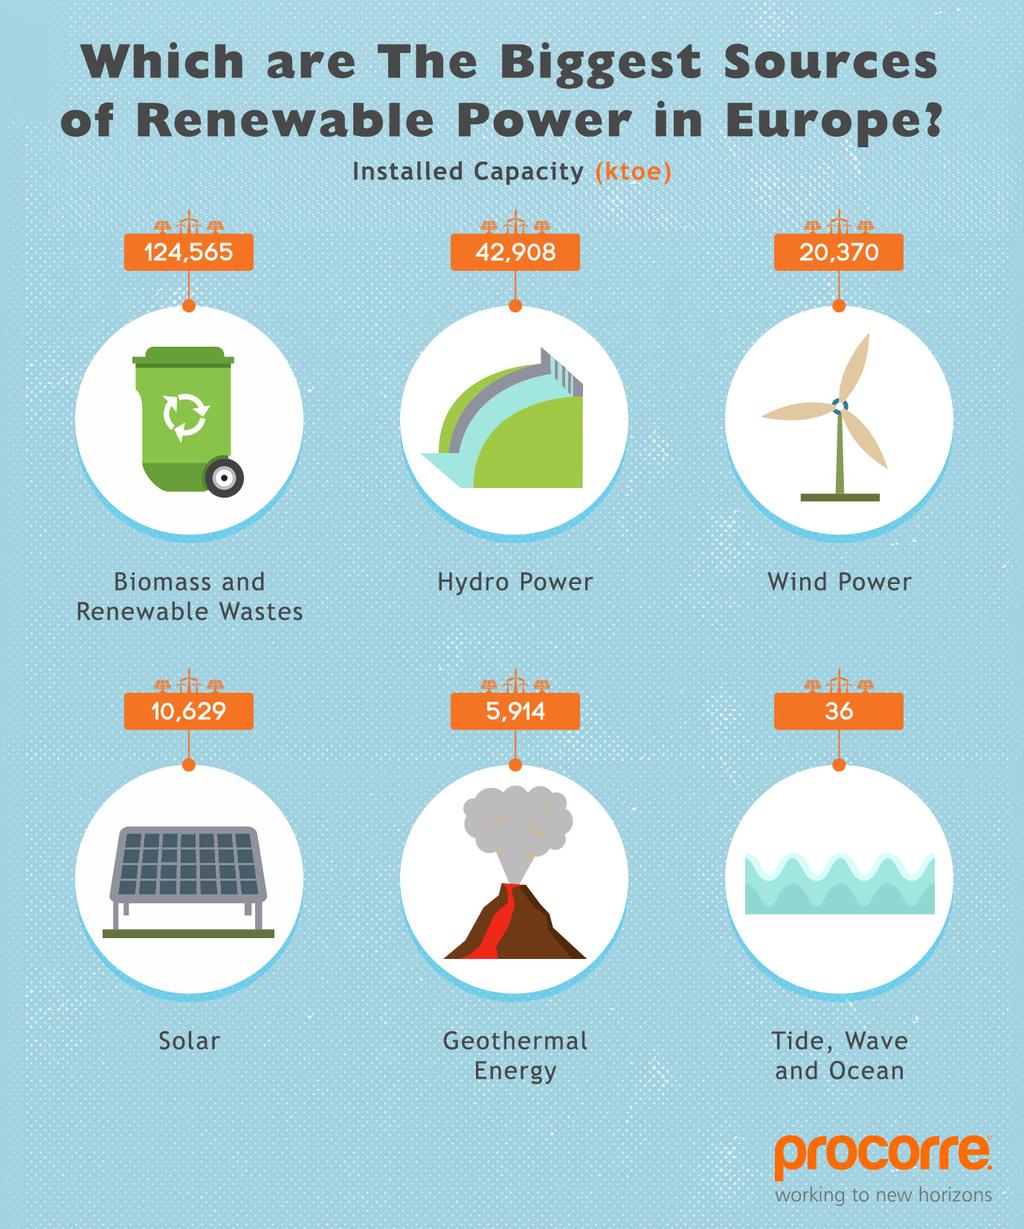 Biomass and renewable wastes dominate renewable production table Biomass and renewable wastes, including biofuels, biogas and municipal waste, top the table of power generating renewable energy